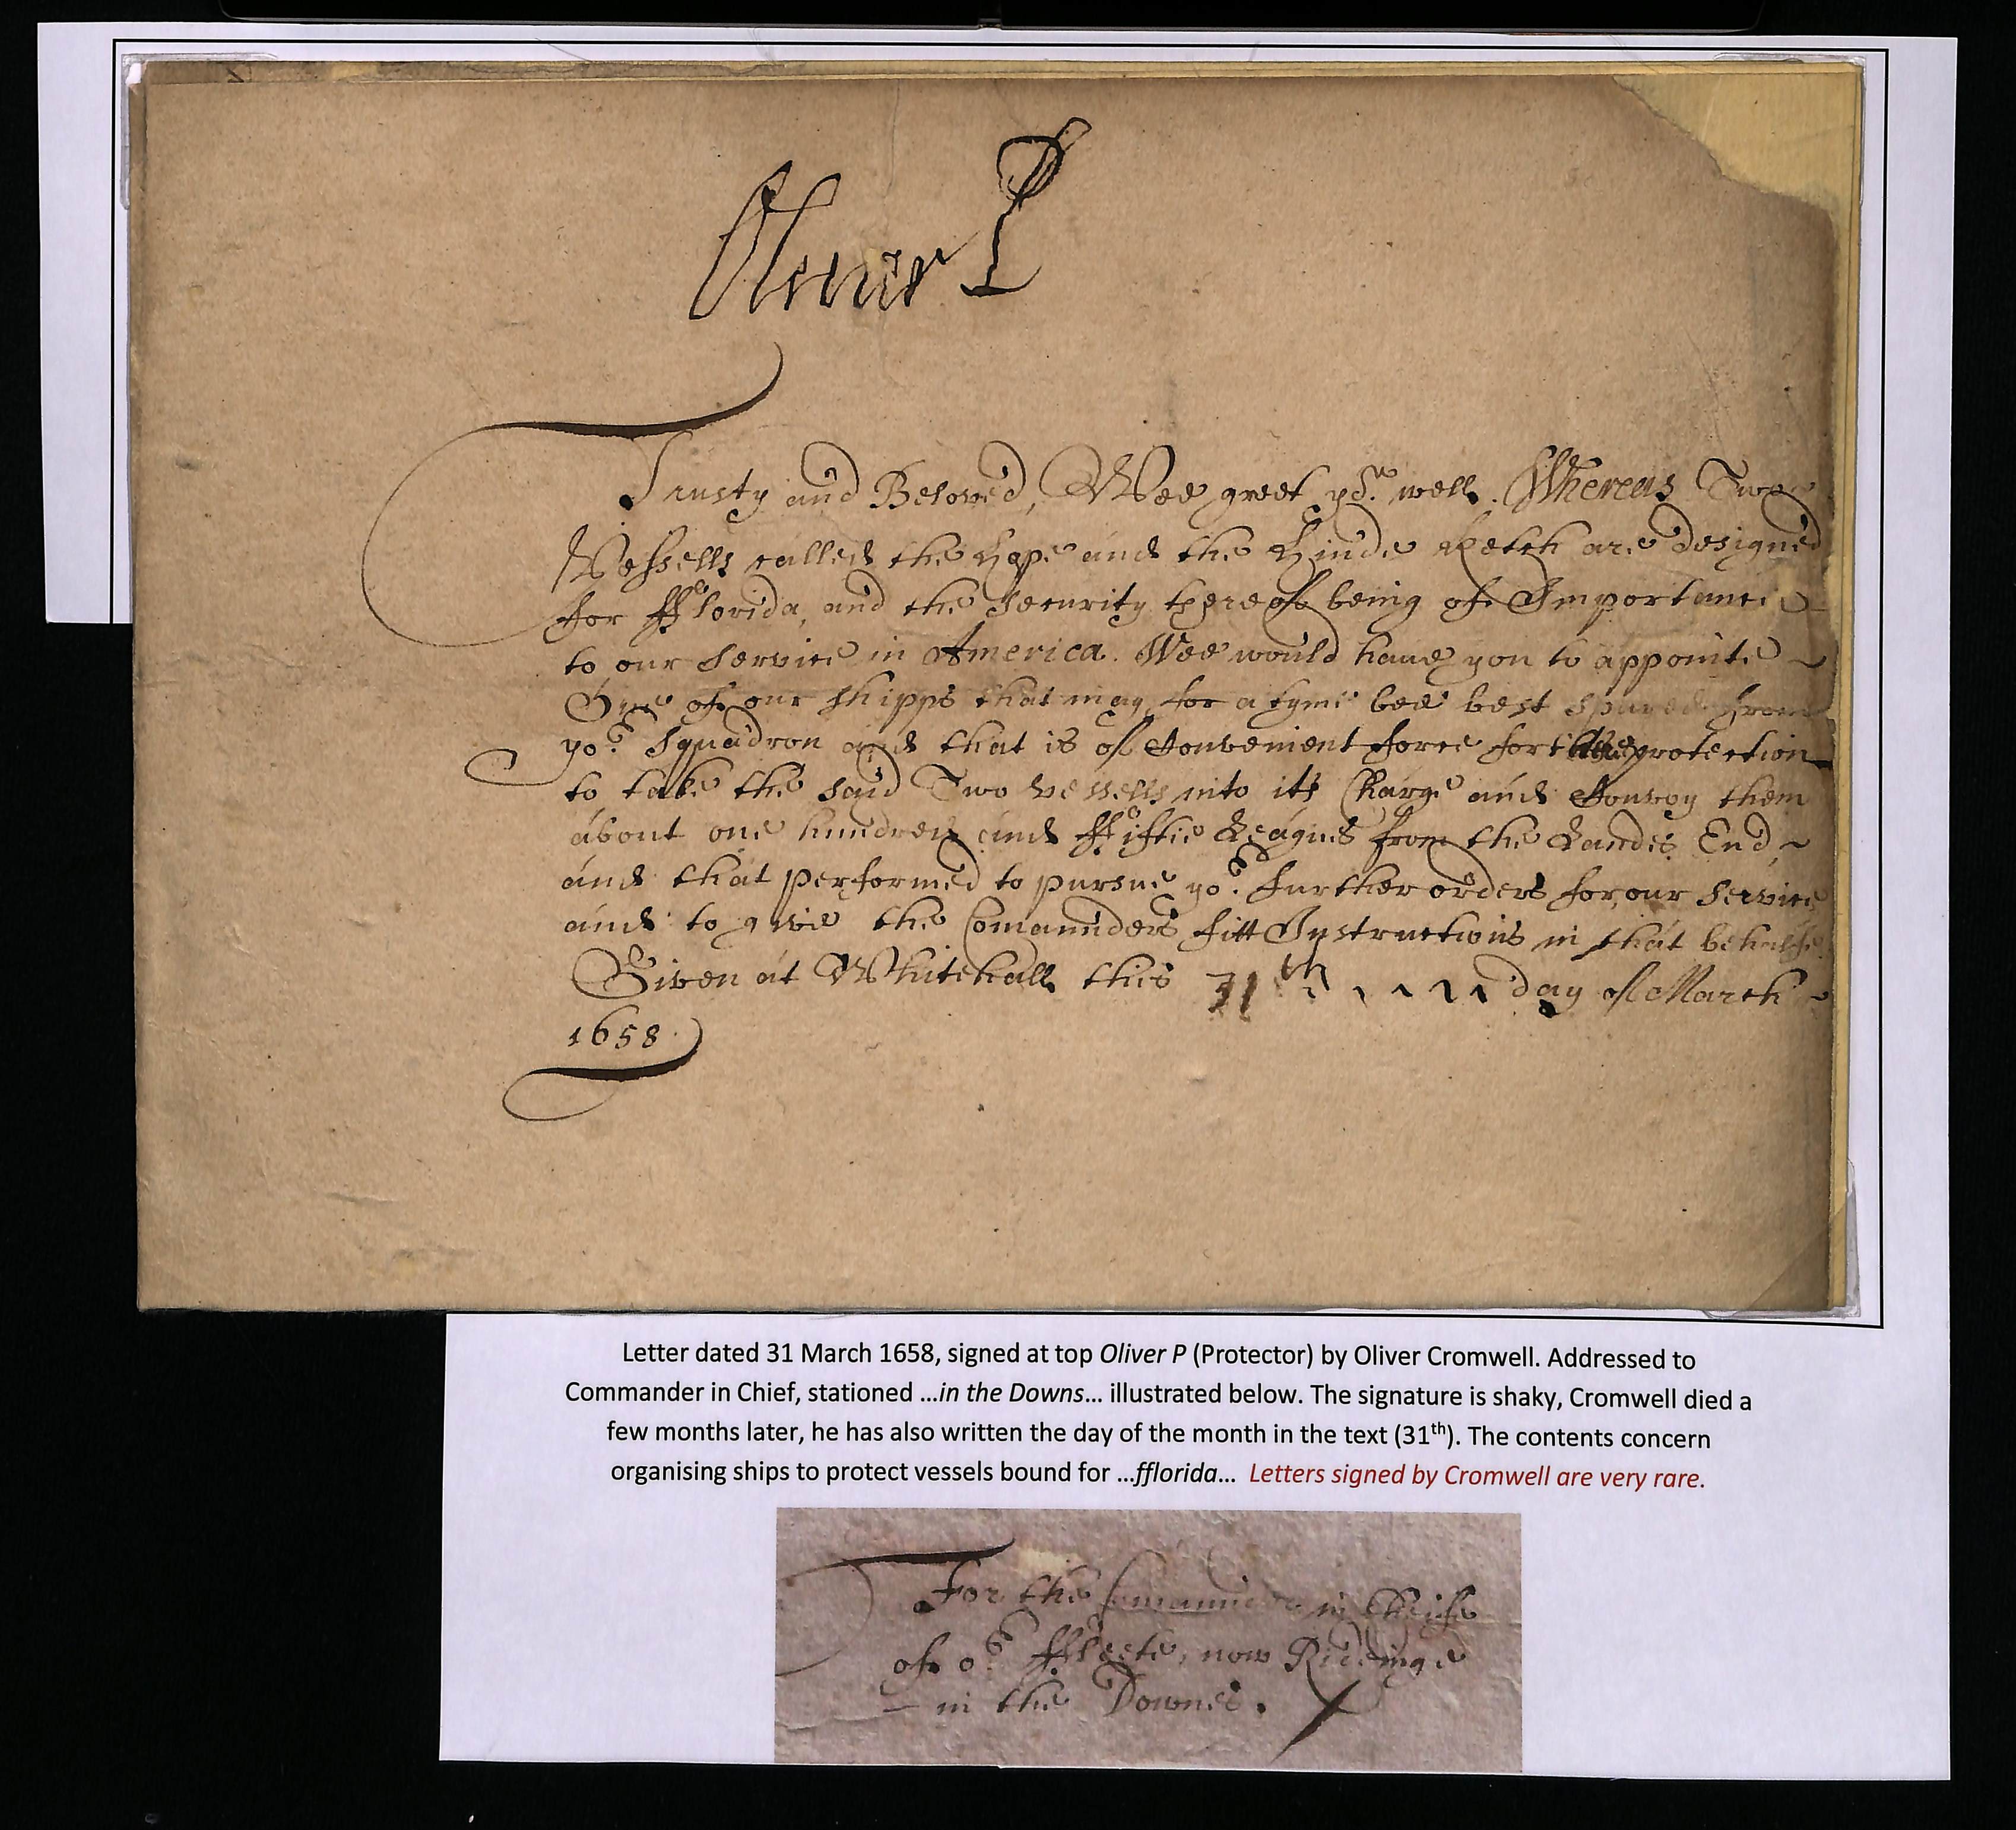 Oliver Cromwell. 1658 (Mar 31) Letter from Whitehall to "The Commander in Chief of our fleet now